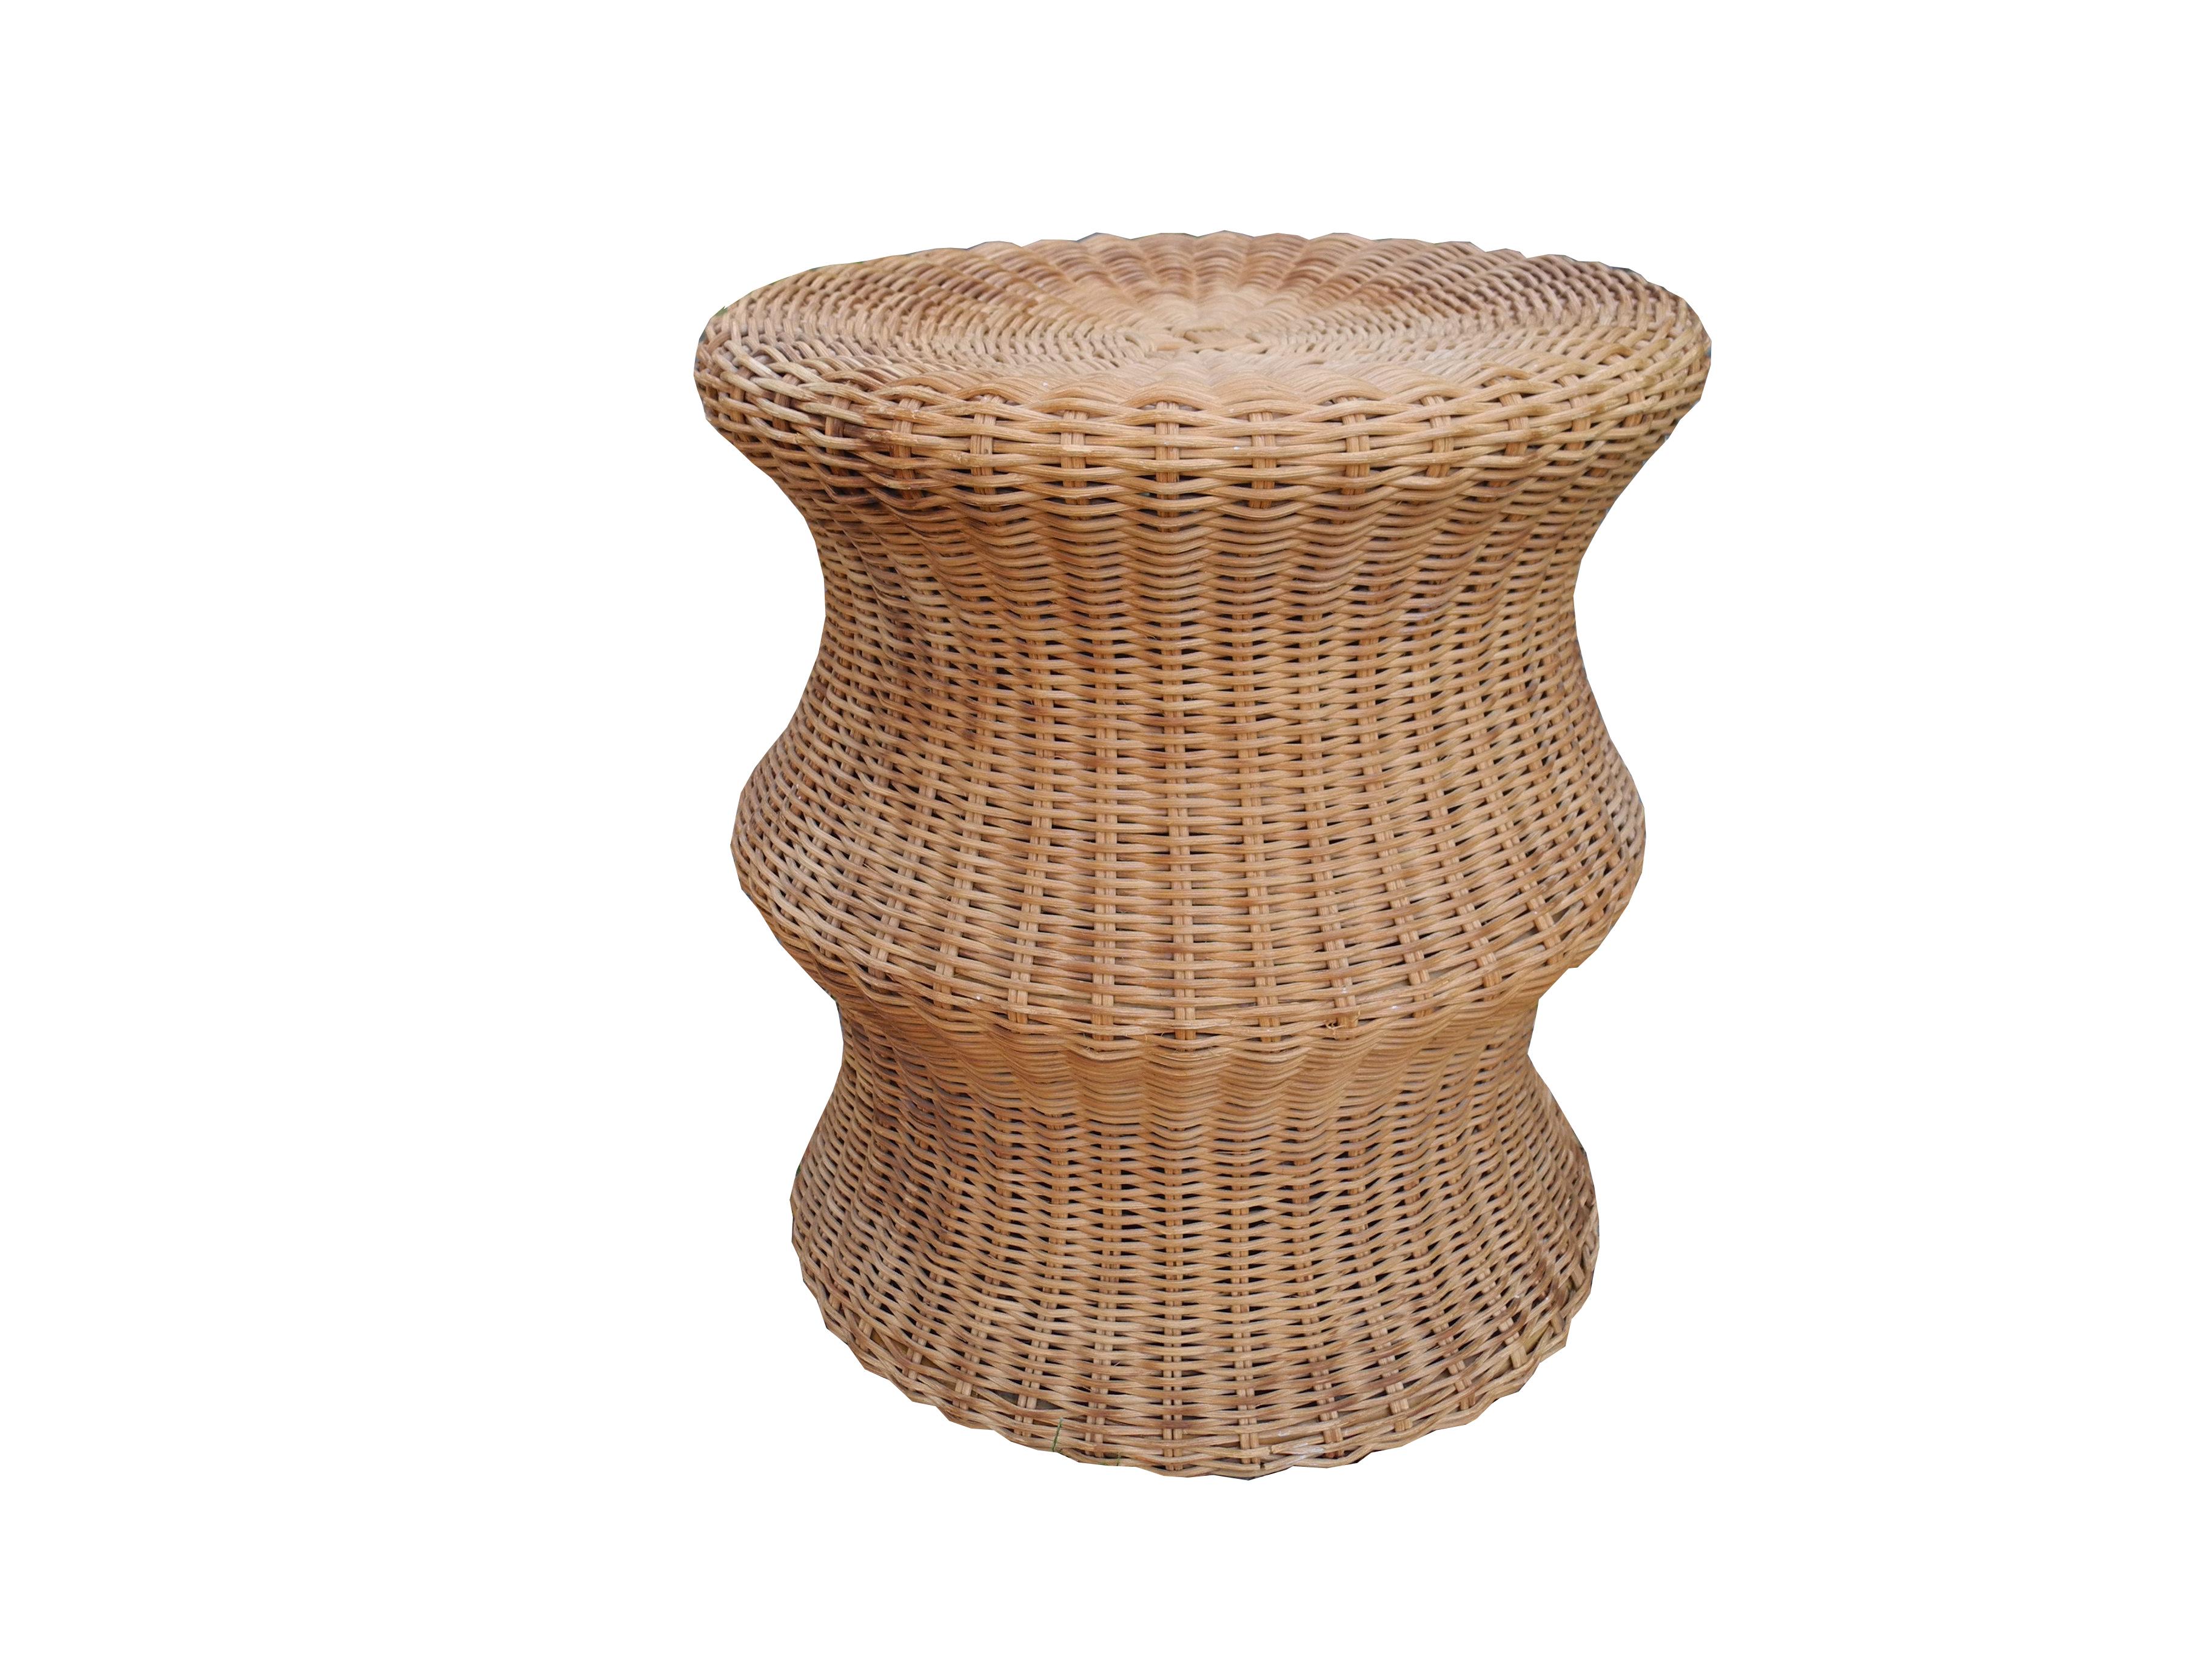 Midcentury stool made of sturdy wicker and beautifully shaped is made by the Finnish designer Eero Aarnio. The stool is stamped Stendig on the inside.